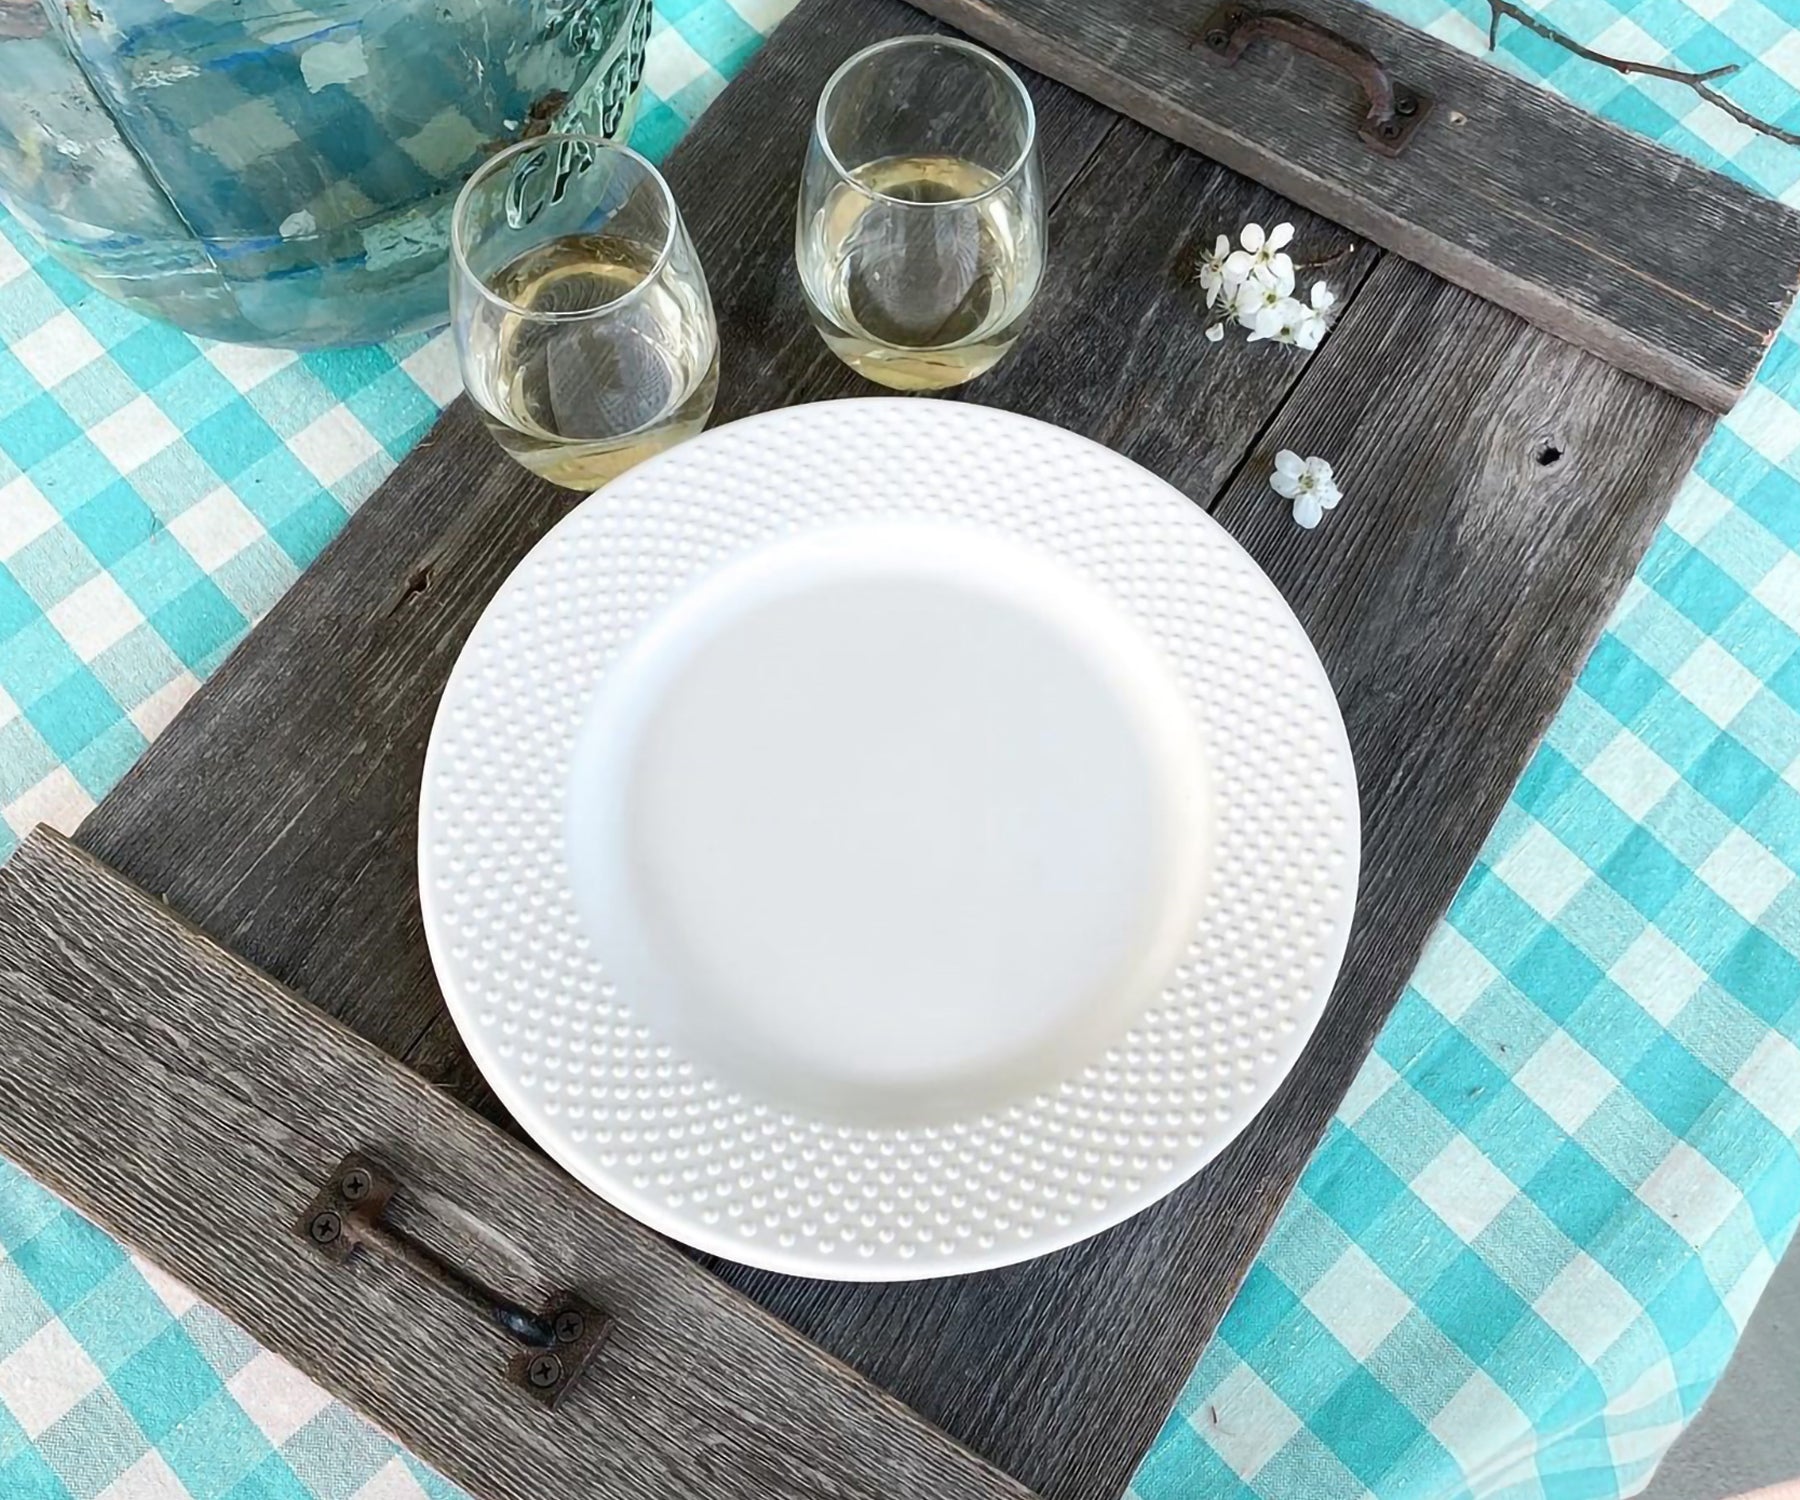 Checkered Tablecloth for a charming tabletop display.